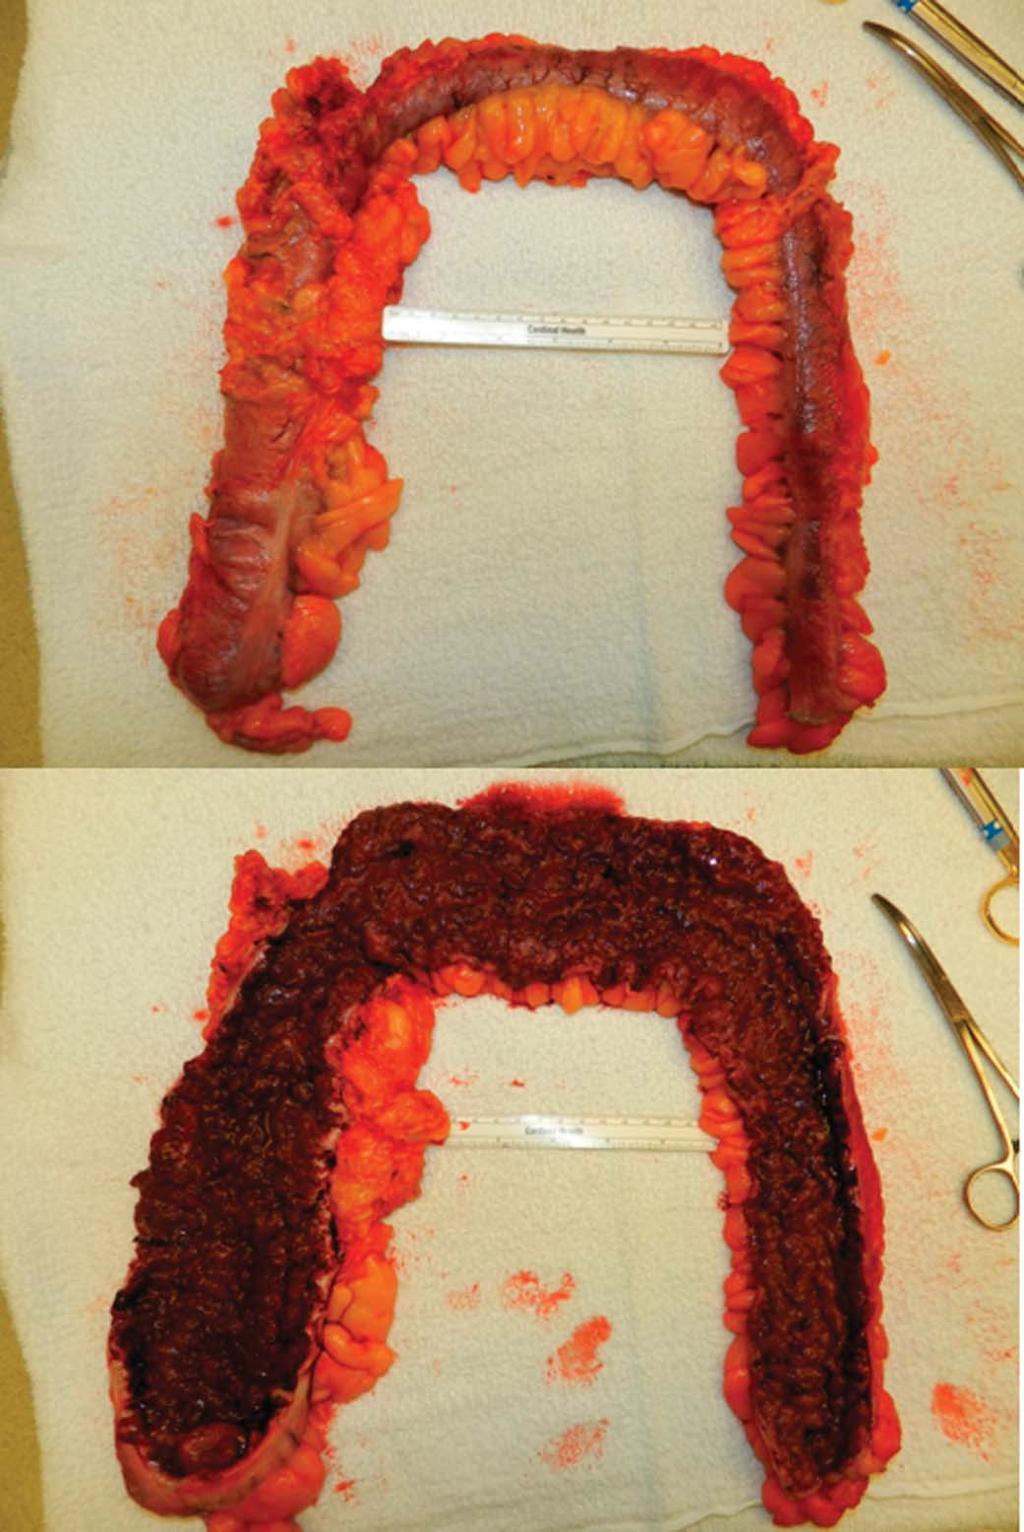 Inflamm Bowel Dis Volume 21, Number 6, June 2015 Minimally Invasive Surgery FIGURE 4. Laparoscopic total abdominal colectomy for CUC gross specimen. Pseudopolyposis with thickened bowel wall.